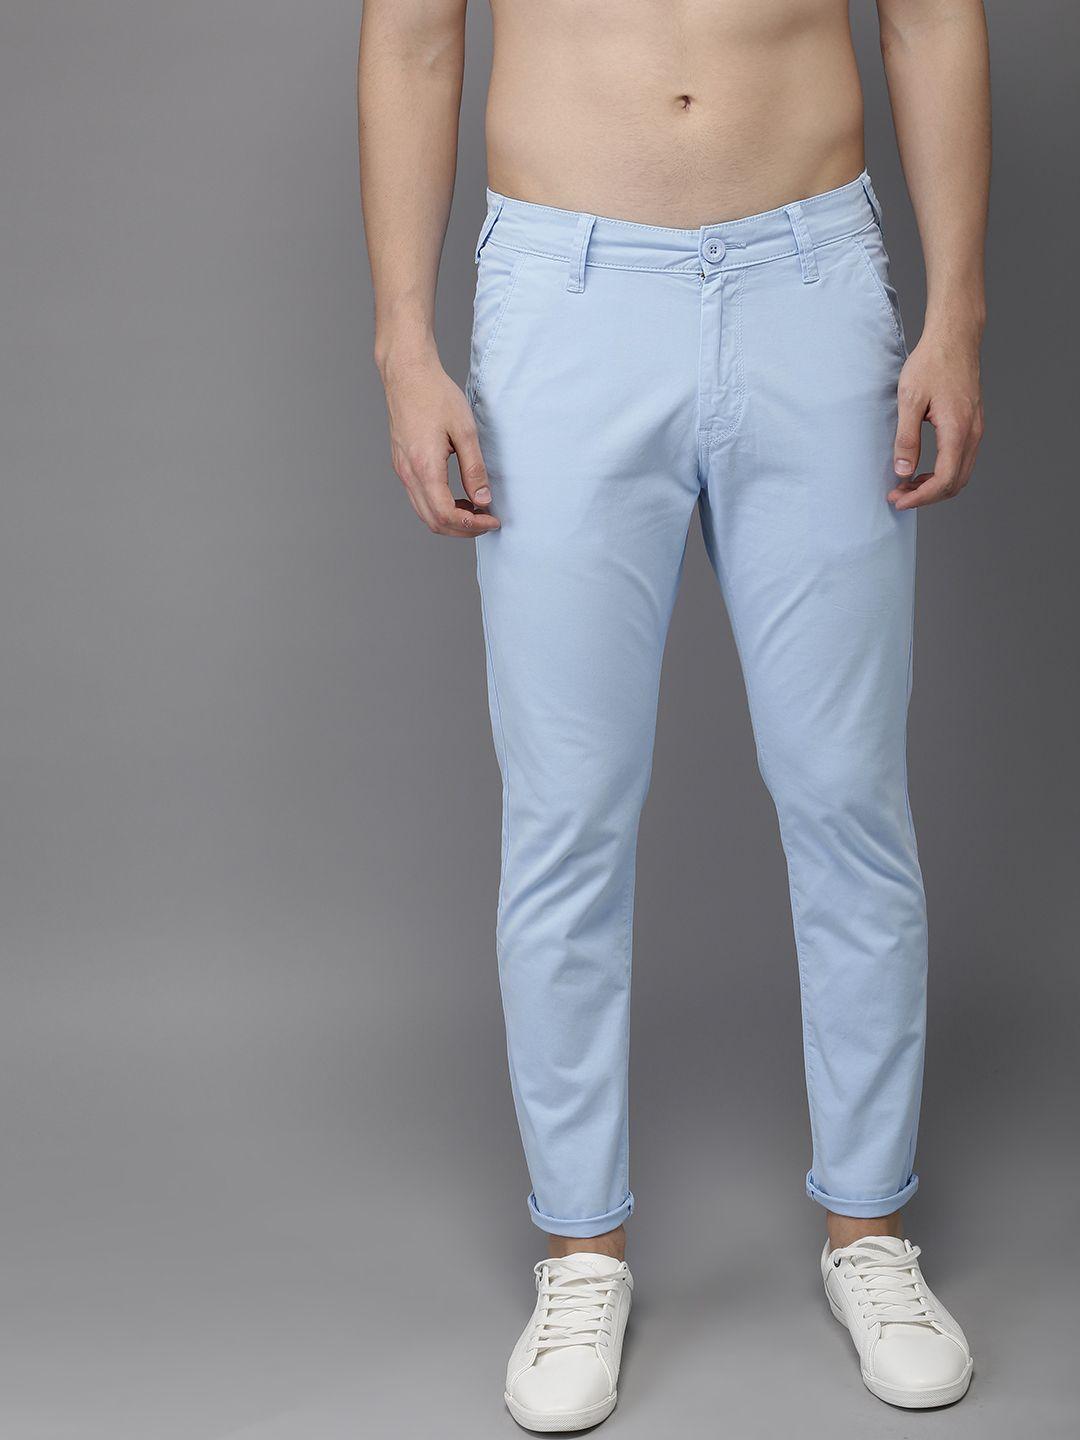 here&now men blue slim fit solid chinos